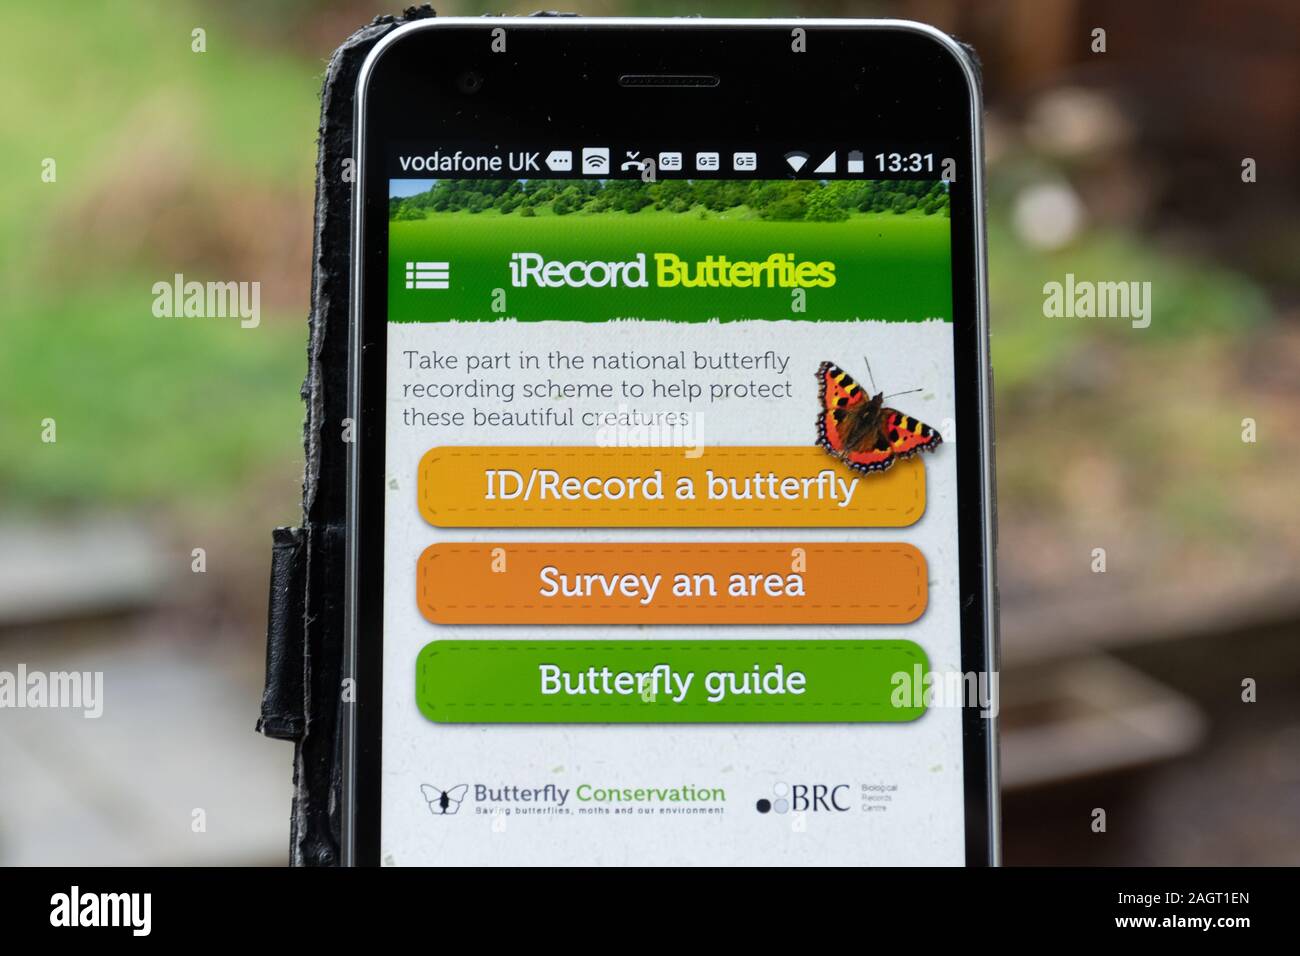 iRecord butterflies app on a mobile phone, for identification and recording of butterflies (wildlife), UK Stock Photo